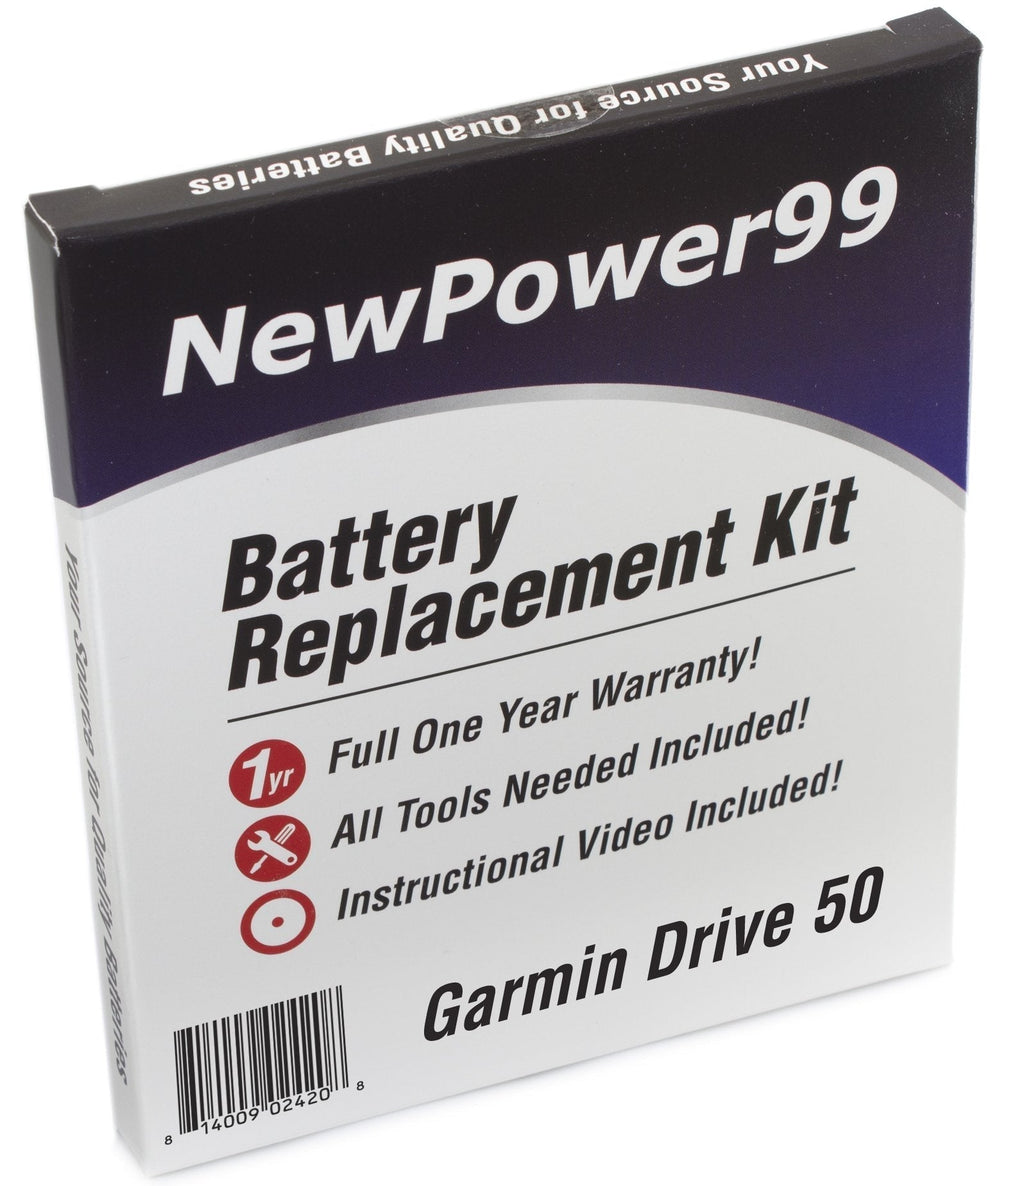  [AUSTRALIA] - Battery Kit for Garmin Drive 50, 50LM, 50LMT with Video Instructions, Tools, and Extended Life Battery from NewPower99